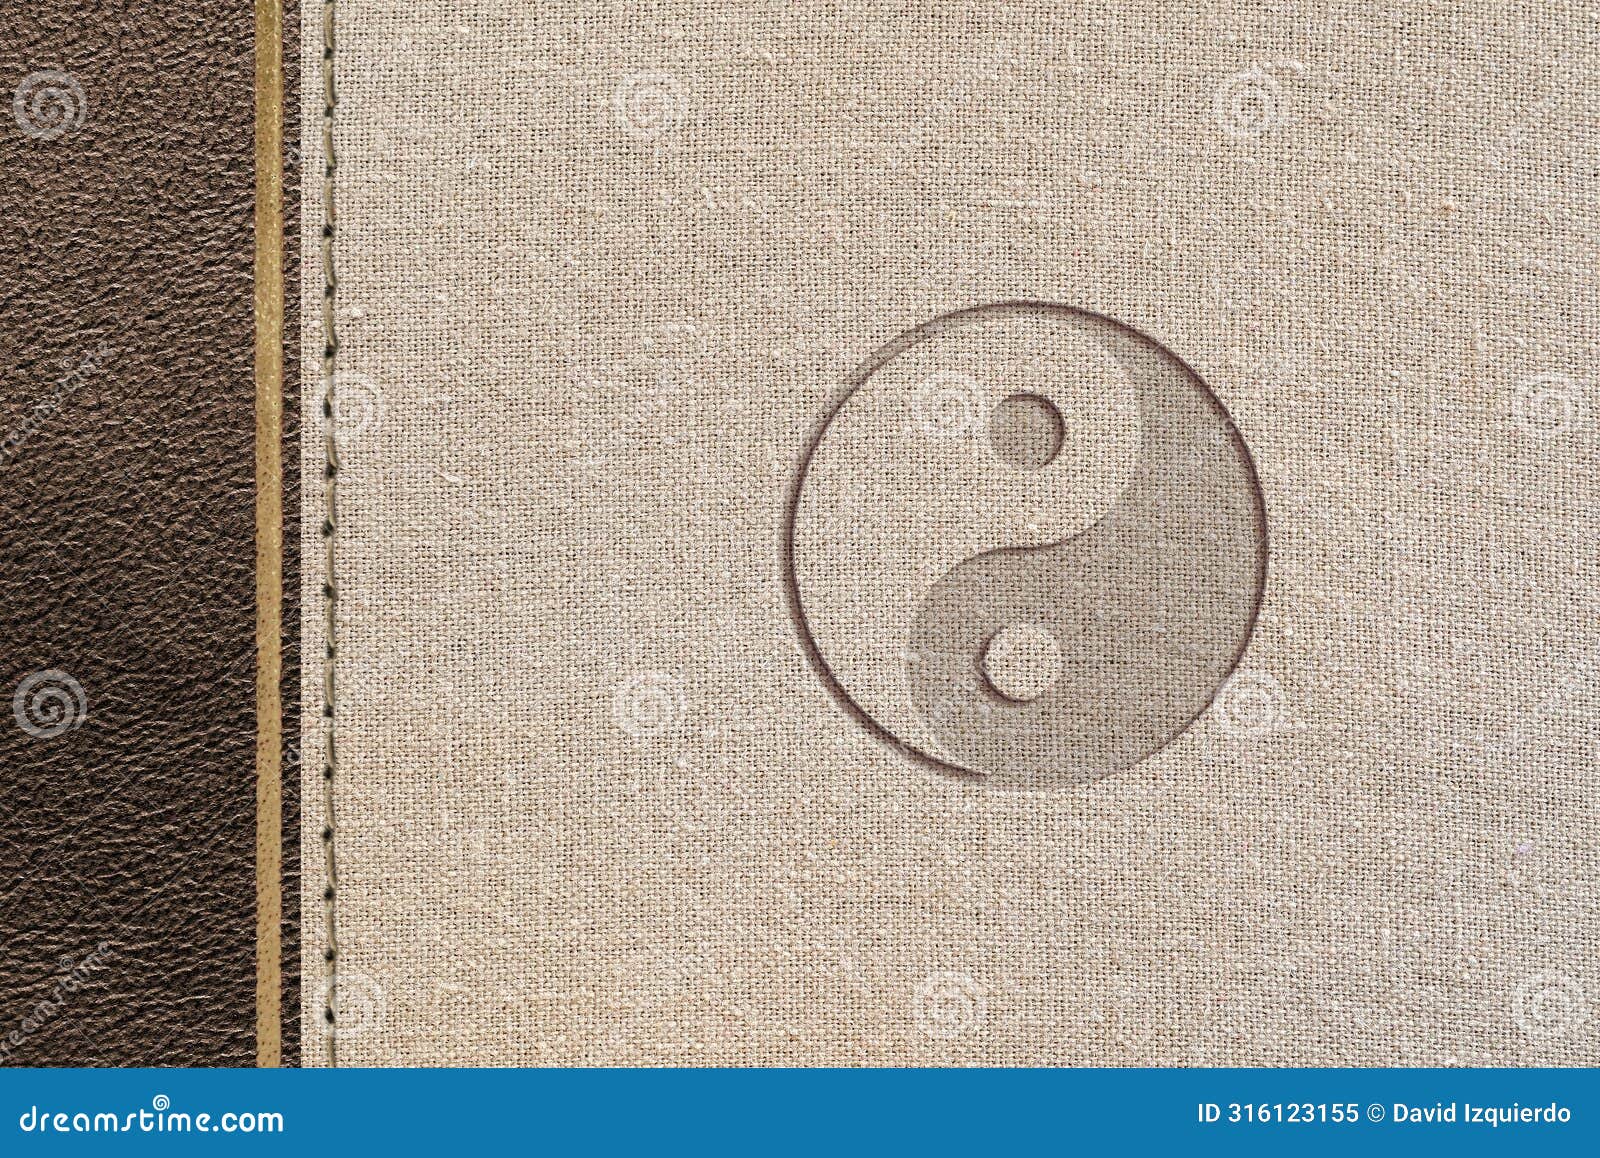 taoist philosophy  with leather and fabric with yin-yang engraved